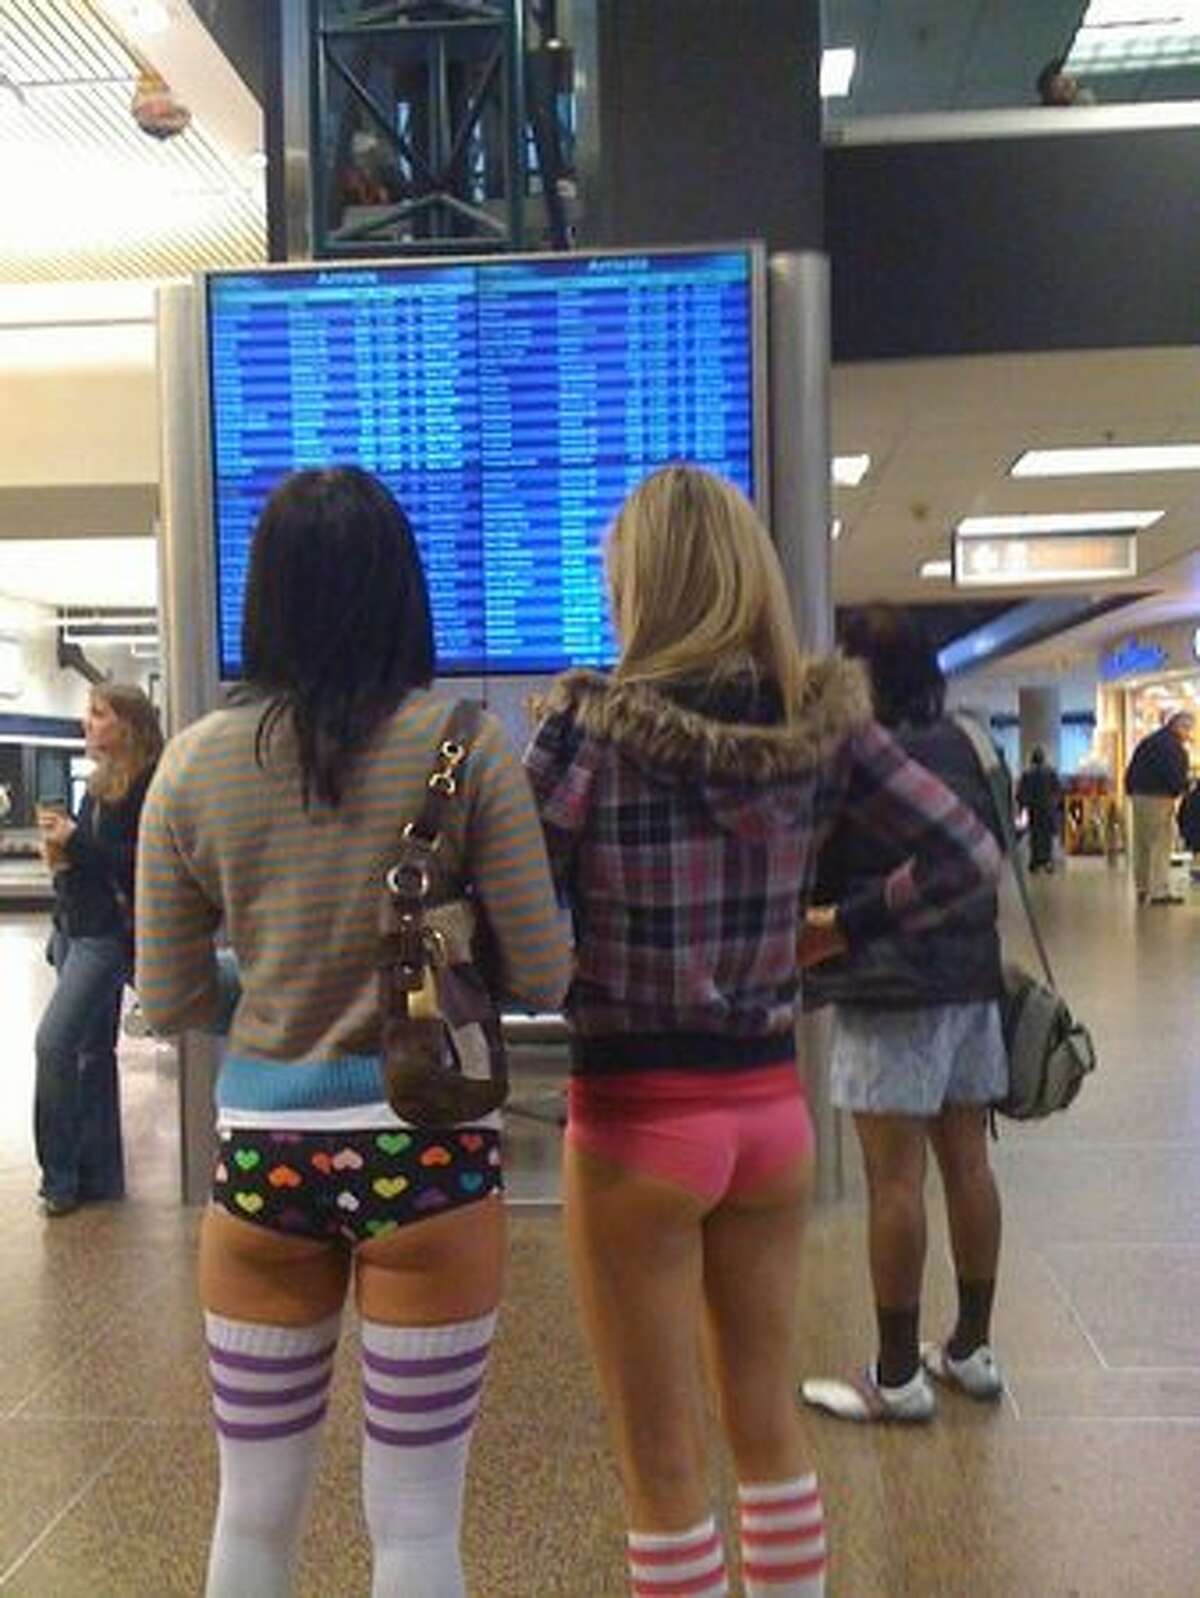 1:35 p.m. -- These women showed no surprise when a small posse of passers-by picked up their trail. They stopped at the departures board. "Where are you going?" someone asked. "Amsterdam, the girl in polka-dot boxers said. "We're going to the red light district." (Mónica Guzmán/seattlepi.com) The back story on the No Pants light rail ride.